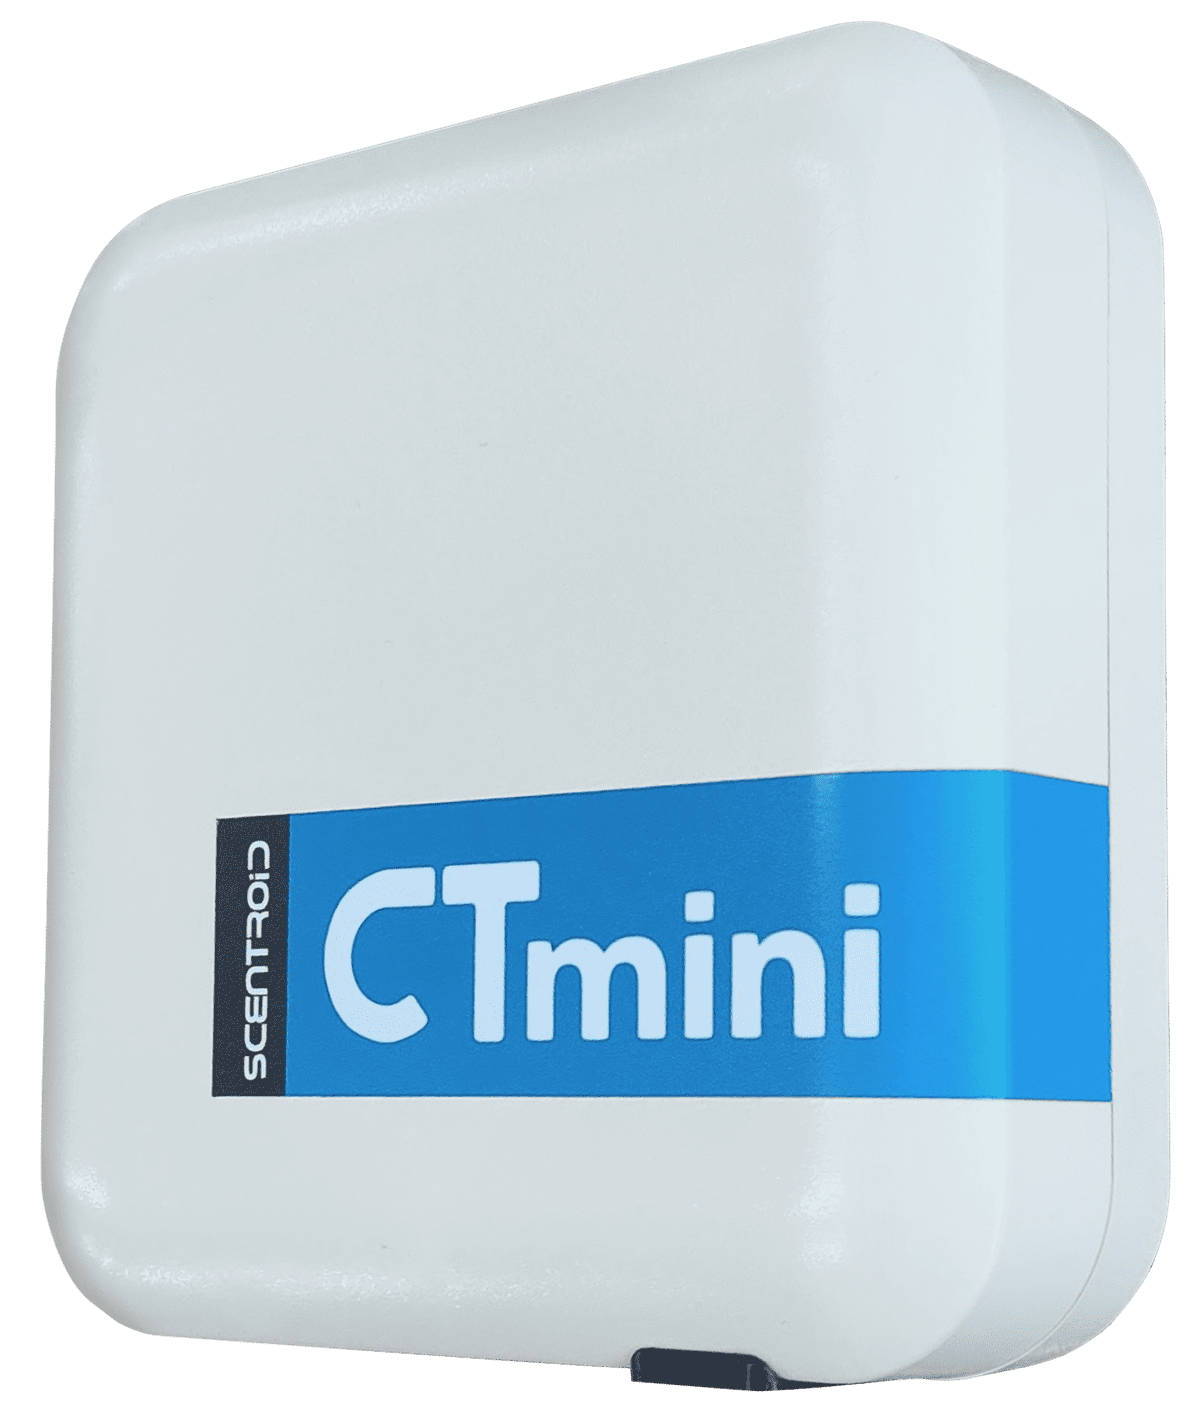 scentroid-CTmini-particulate-matter-monitor-product